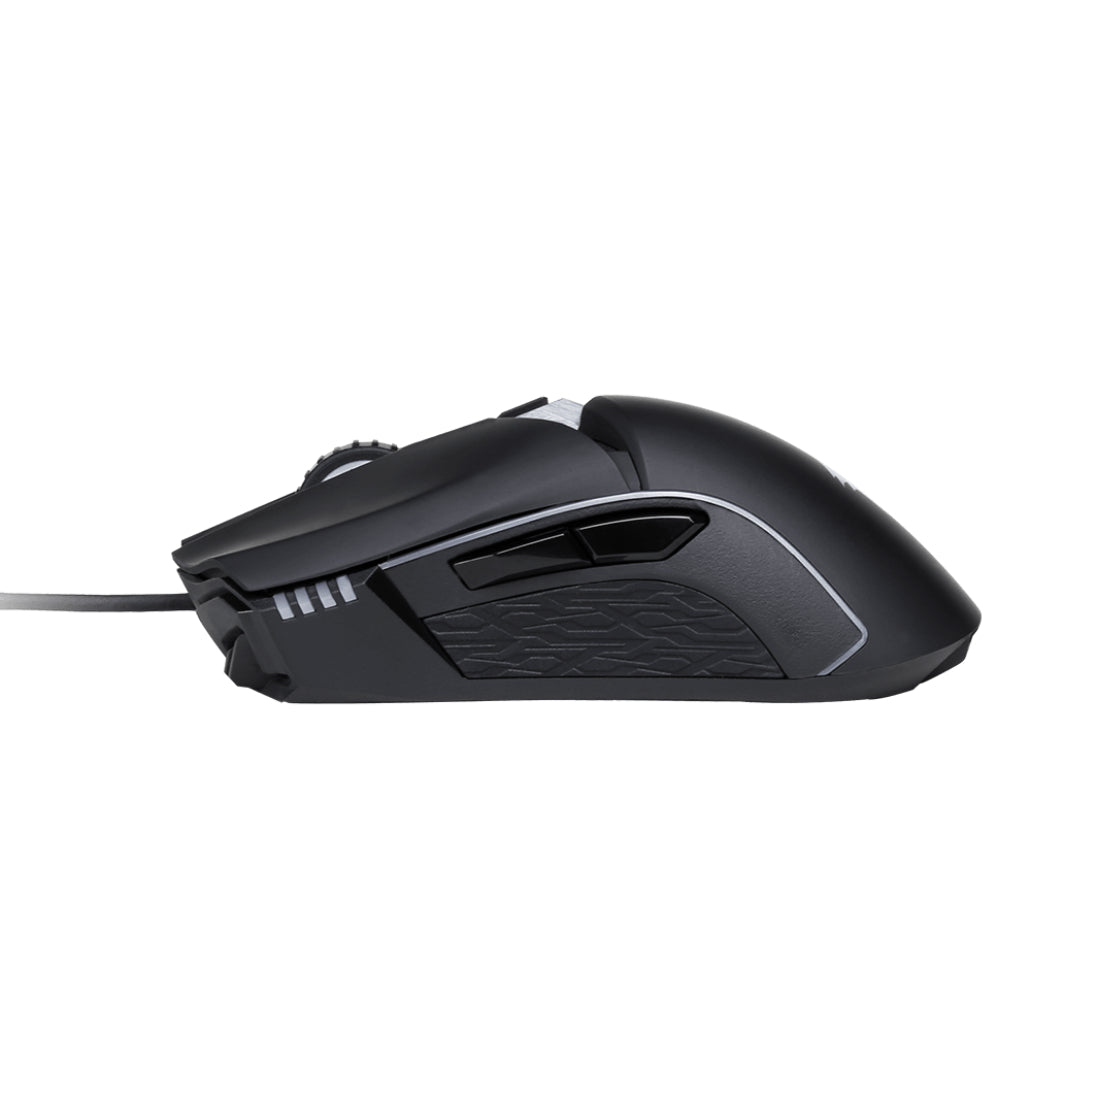 Gigabyte Aorus M5 Wired Gaming Mouse - Matte Black - Store 974 | ستور ٩٧٤